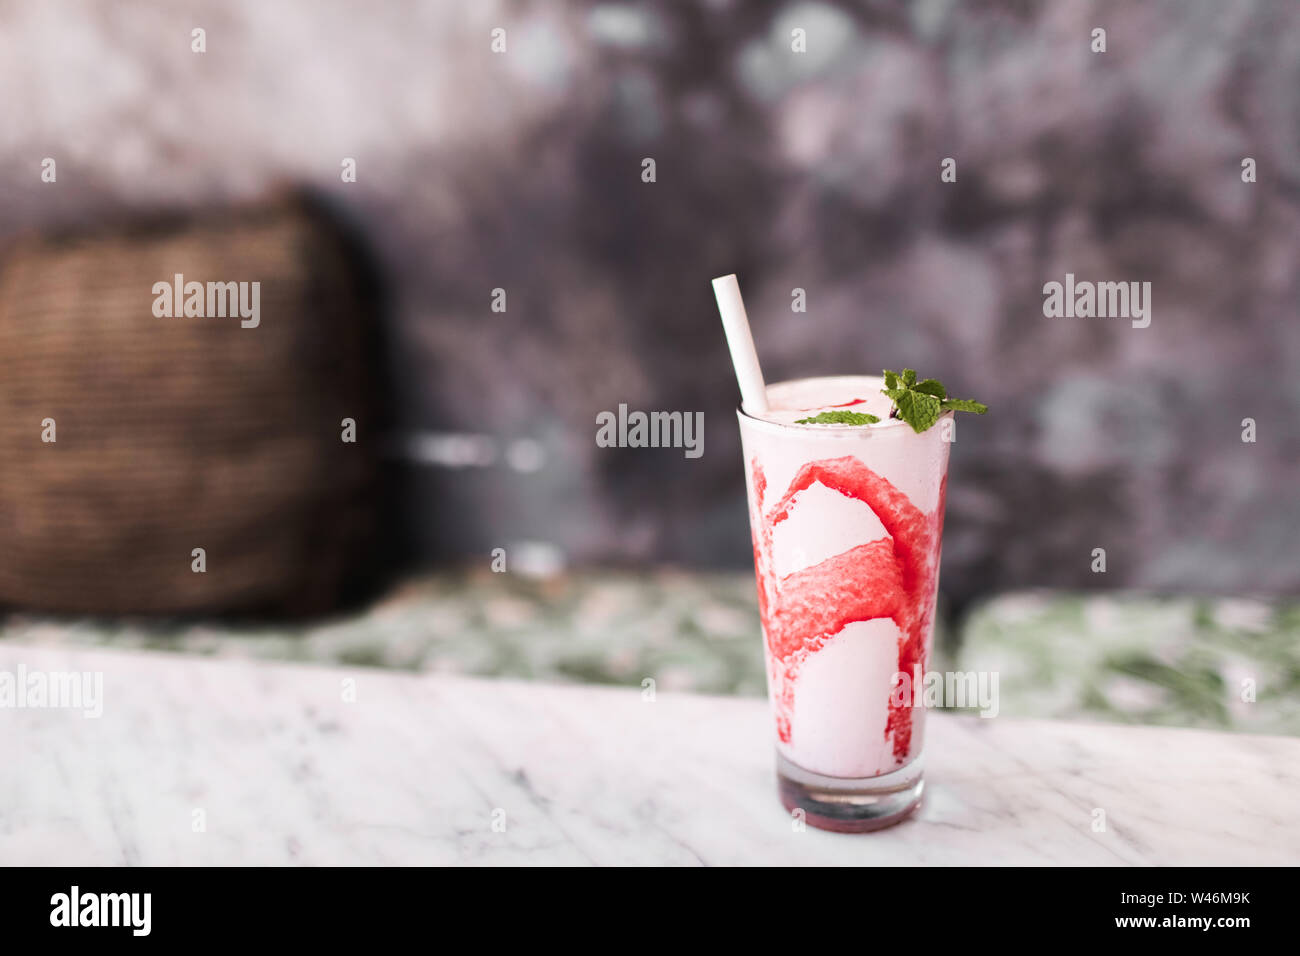 Fresh tasty cold milk shake with red strawberry syrup on white marble table. Gray concrete background. Sweet frappuccino beverage. Summer drink Stock Photo